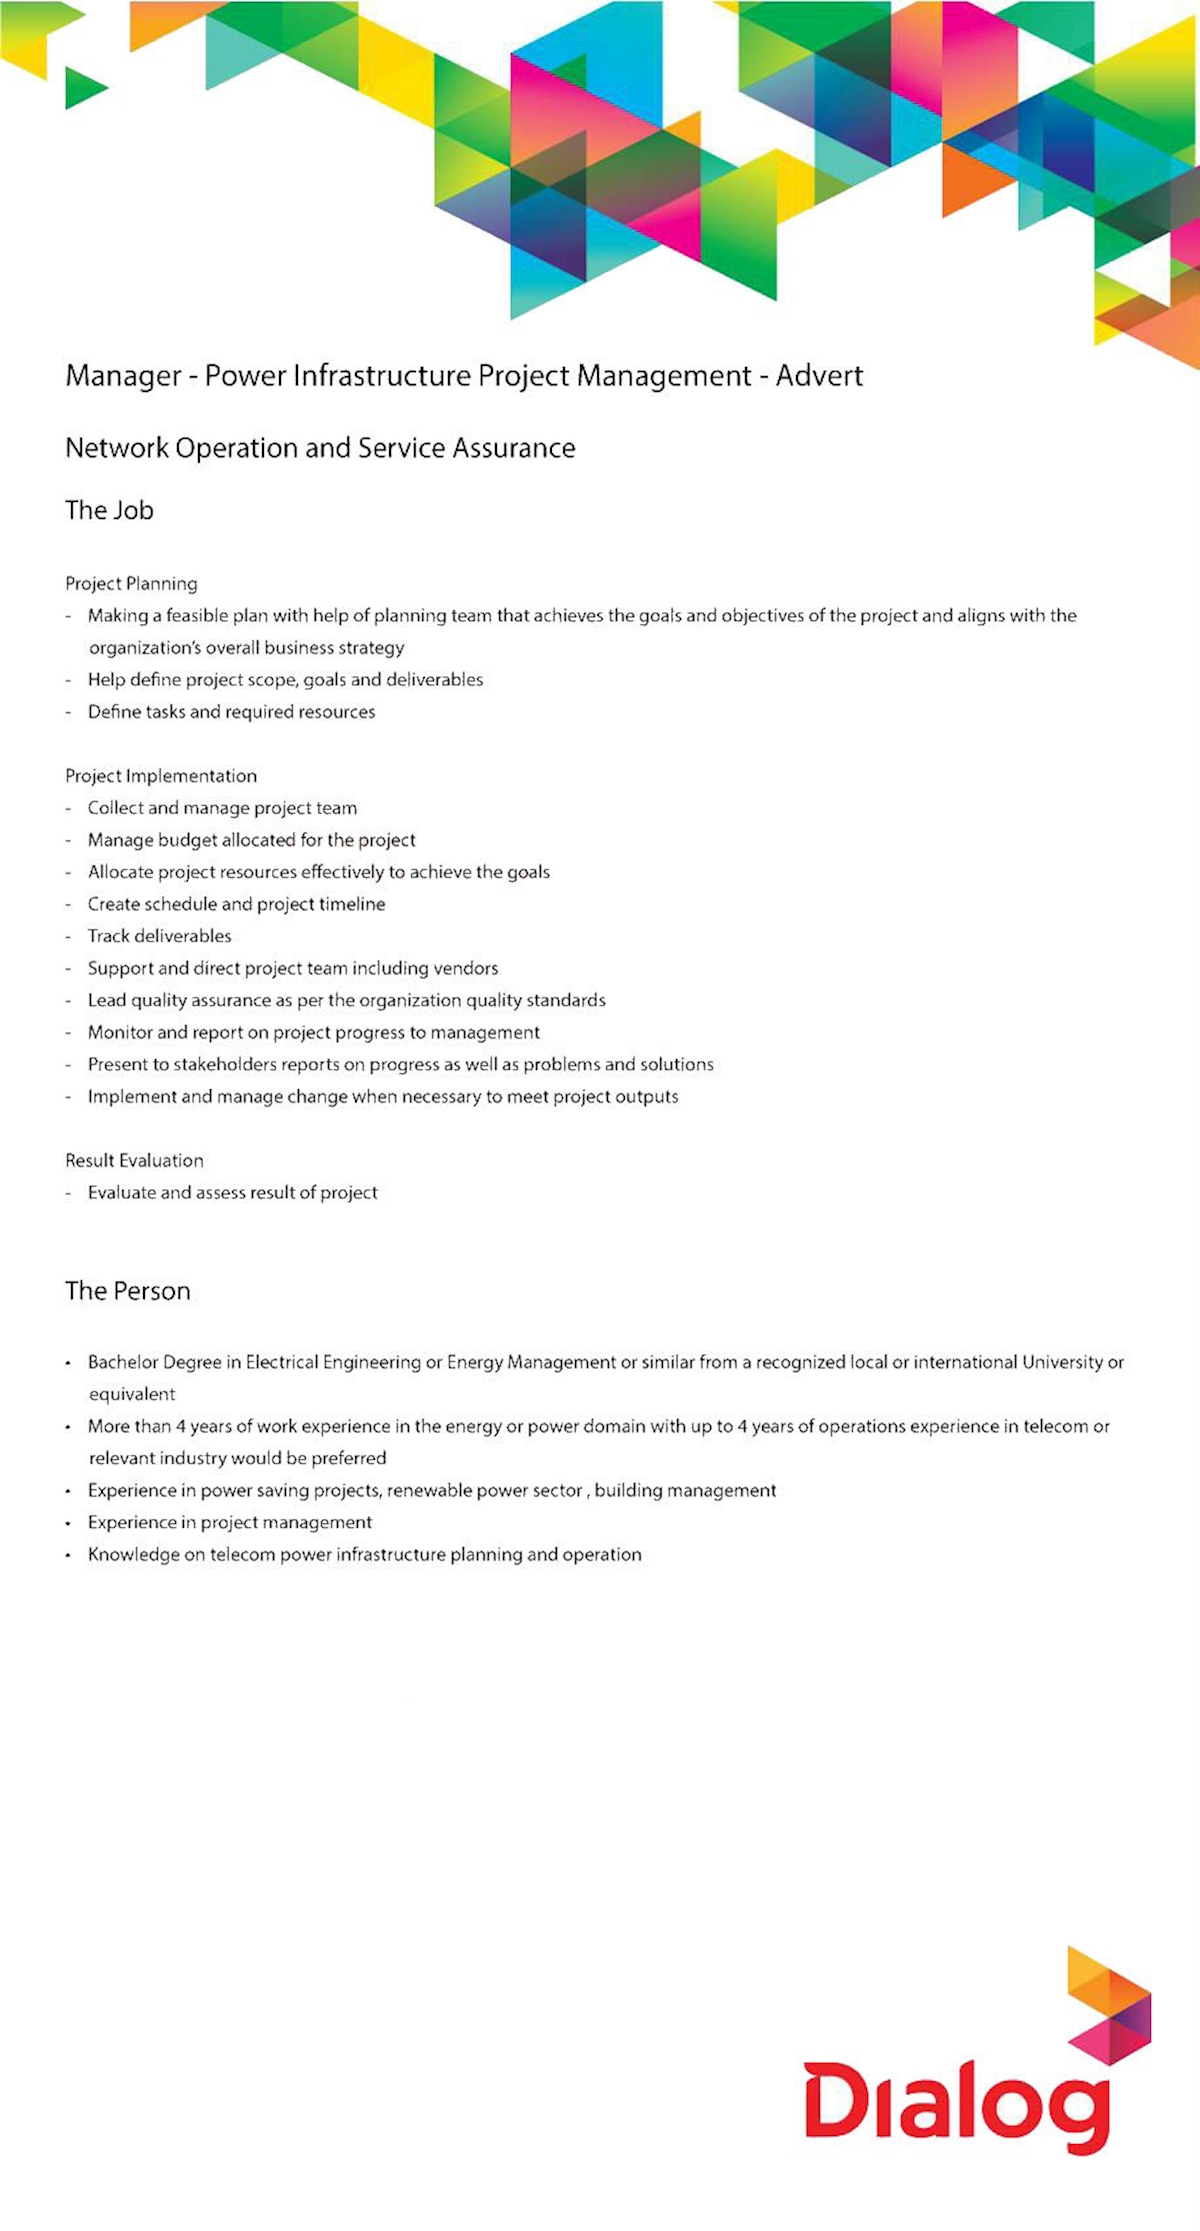 Manager - Power Infrastructure Project Management - Advert